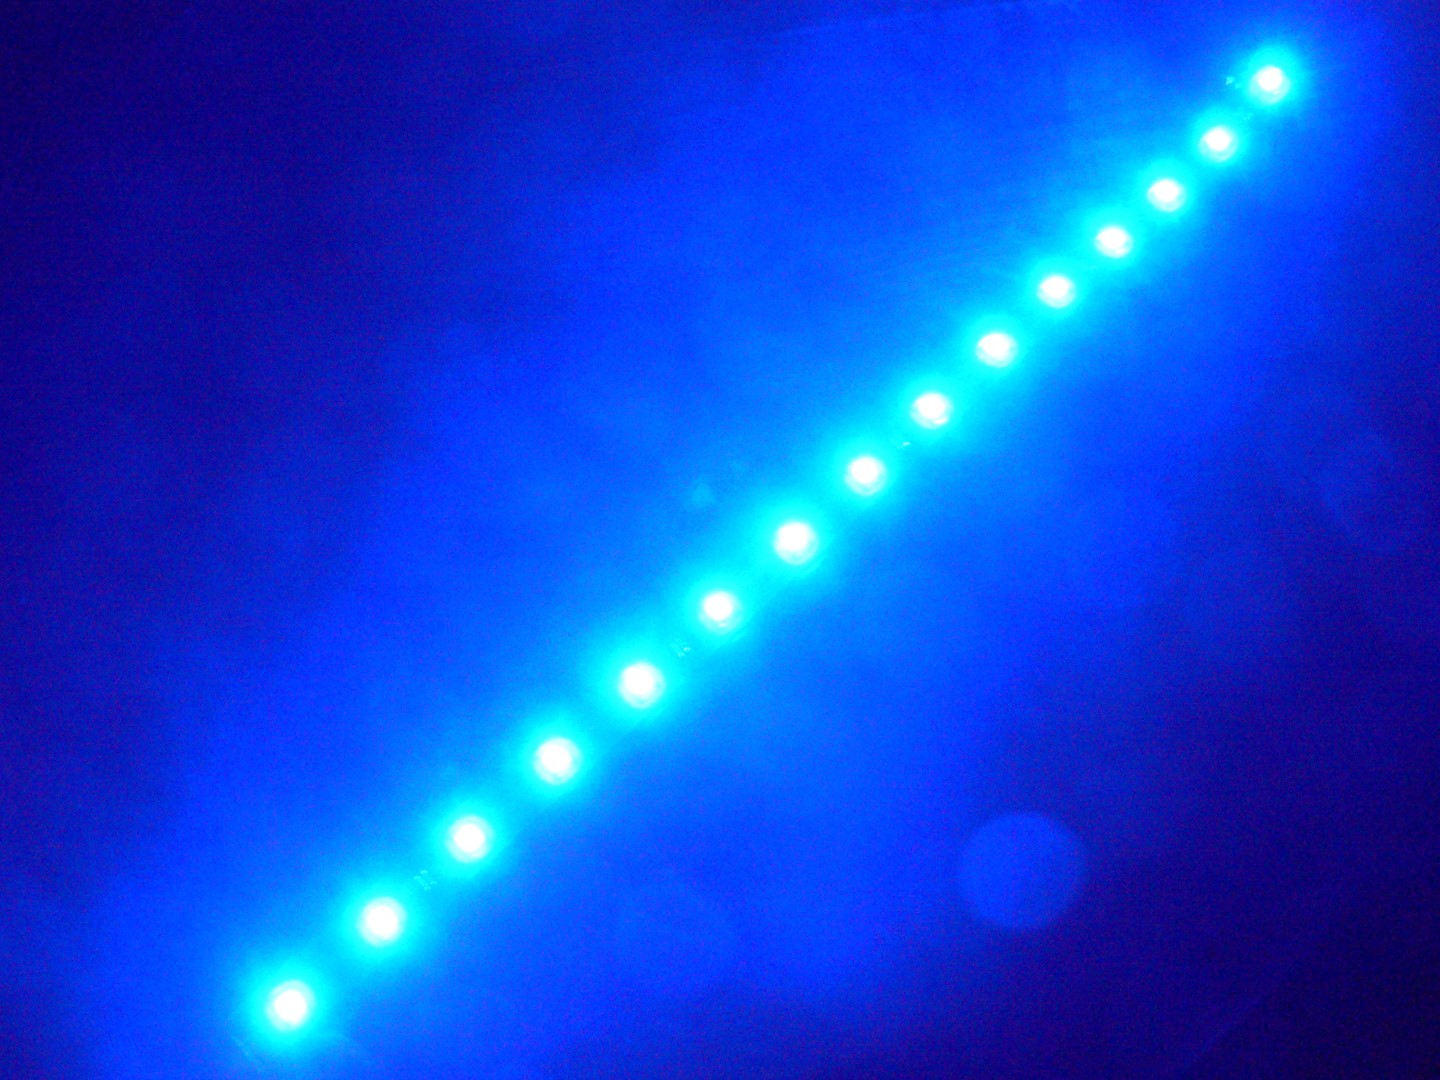 Blue 15 LED Strip Adhesive Backed 1 Foot (30cm) Long